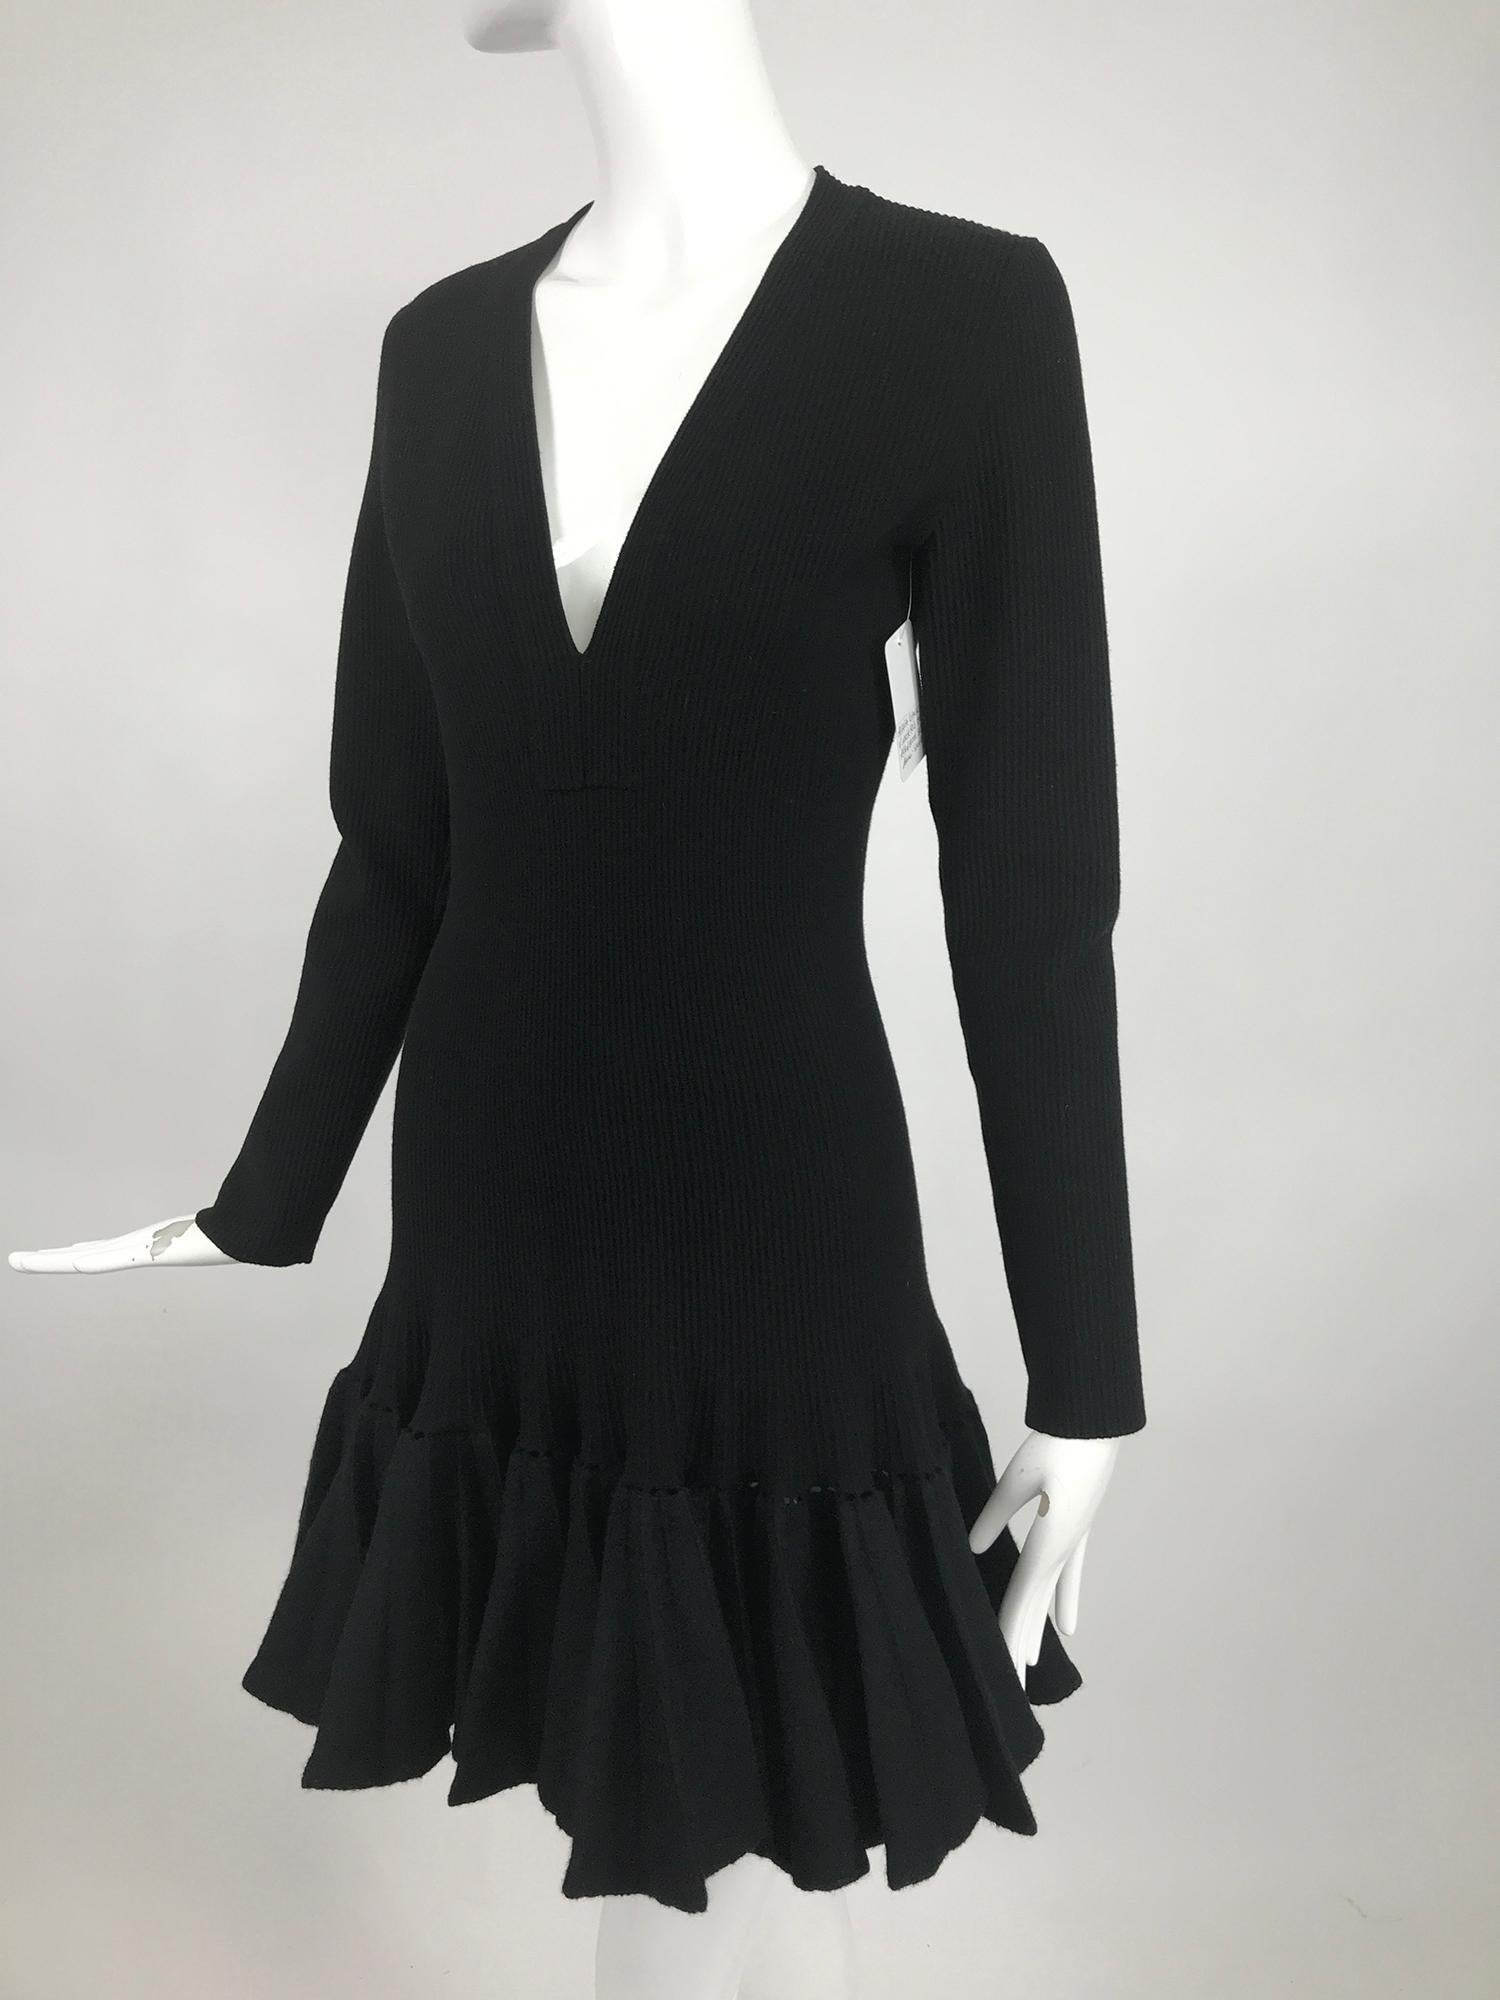 Azzedine Alaia black knit V neck dress with felted wool knife pleated circular hem. Long sleeve ribbed wool torso dress with a plunge v neckline and figure hugging shape. The hem is felted wool attached to the dress with an open stitch. The hem is